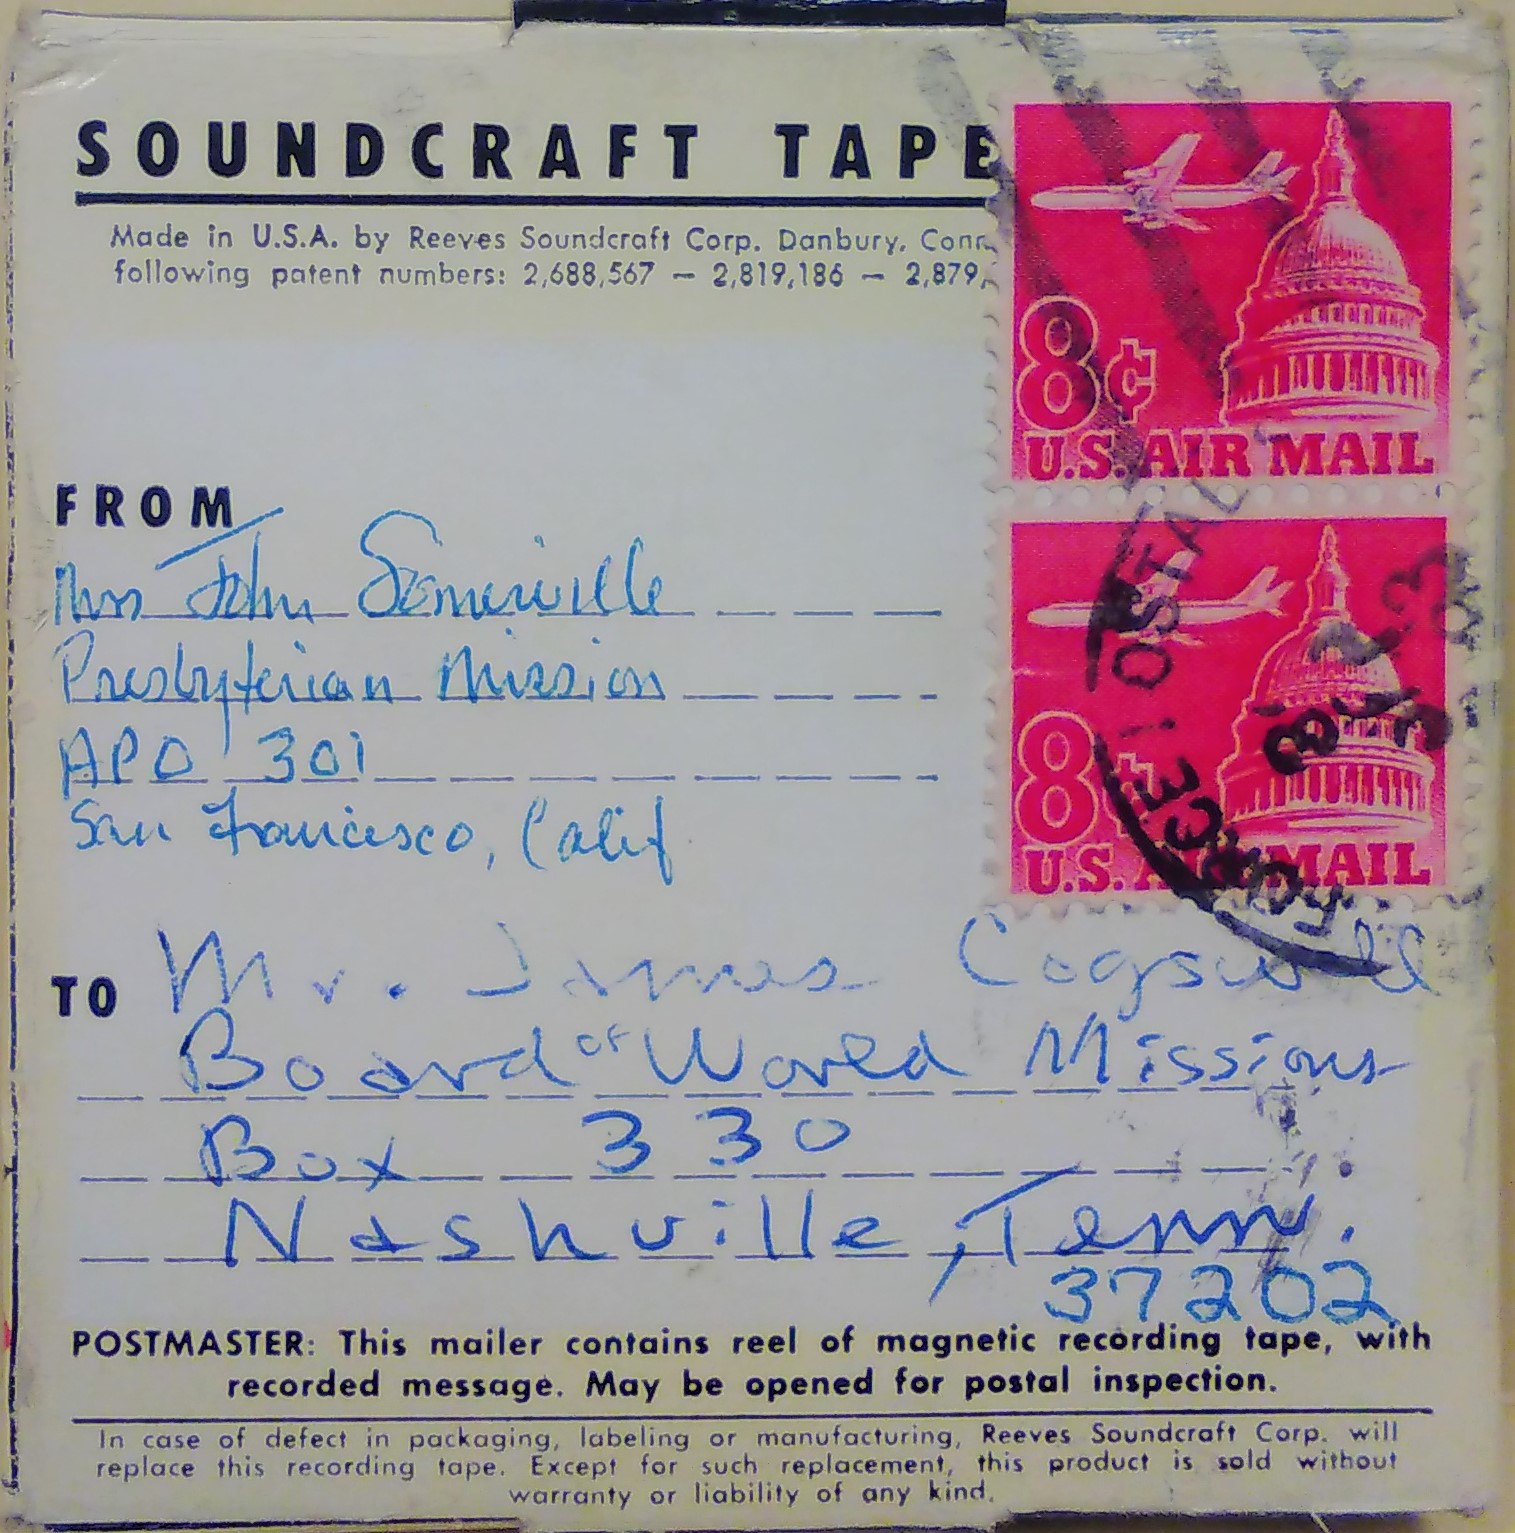 Culbertson audio letter to Cogswell, 1963, tape one, side one.